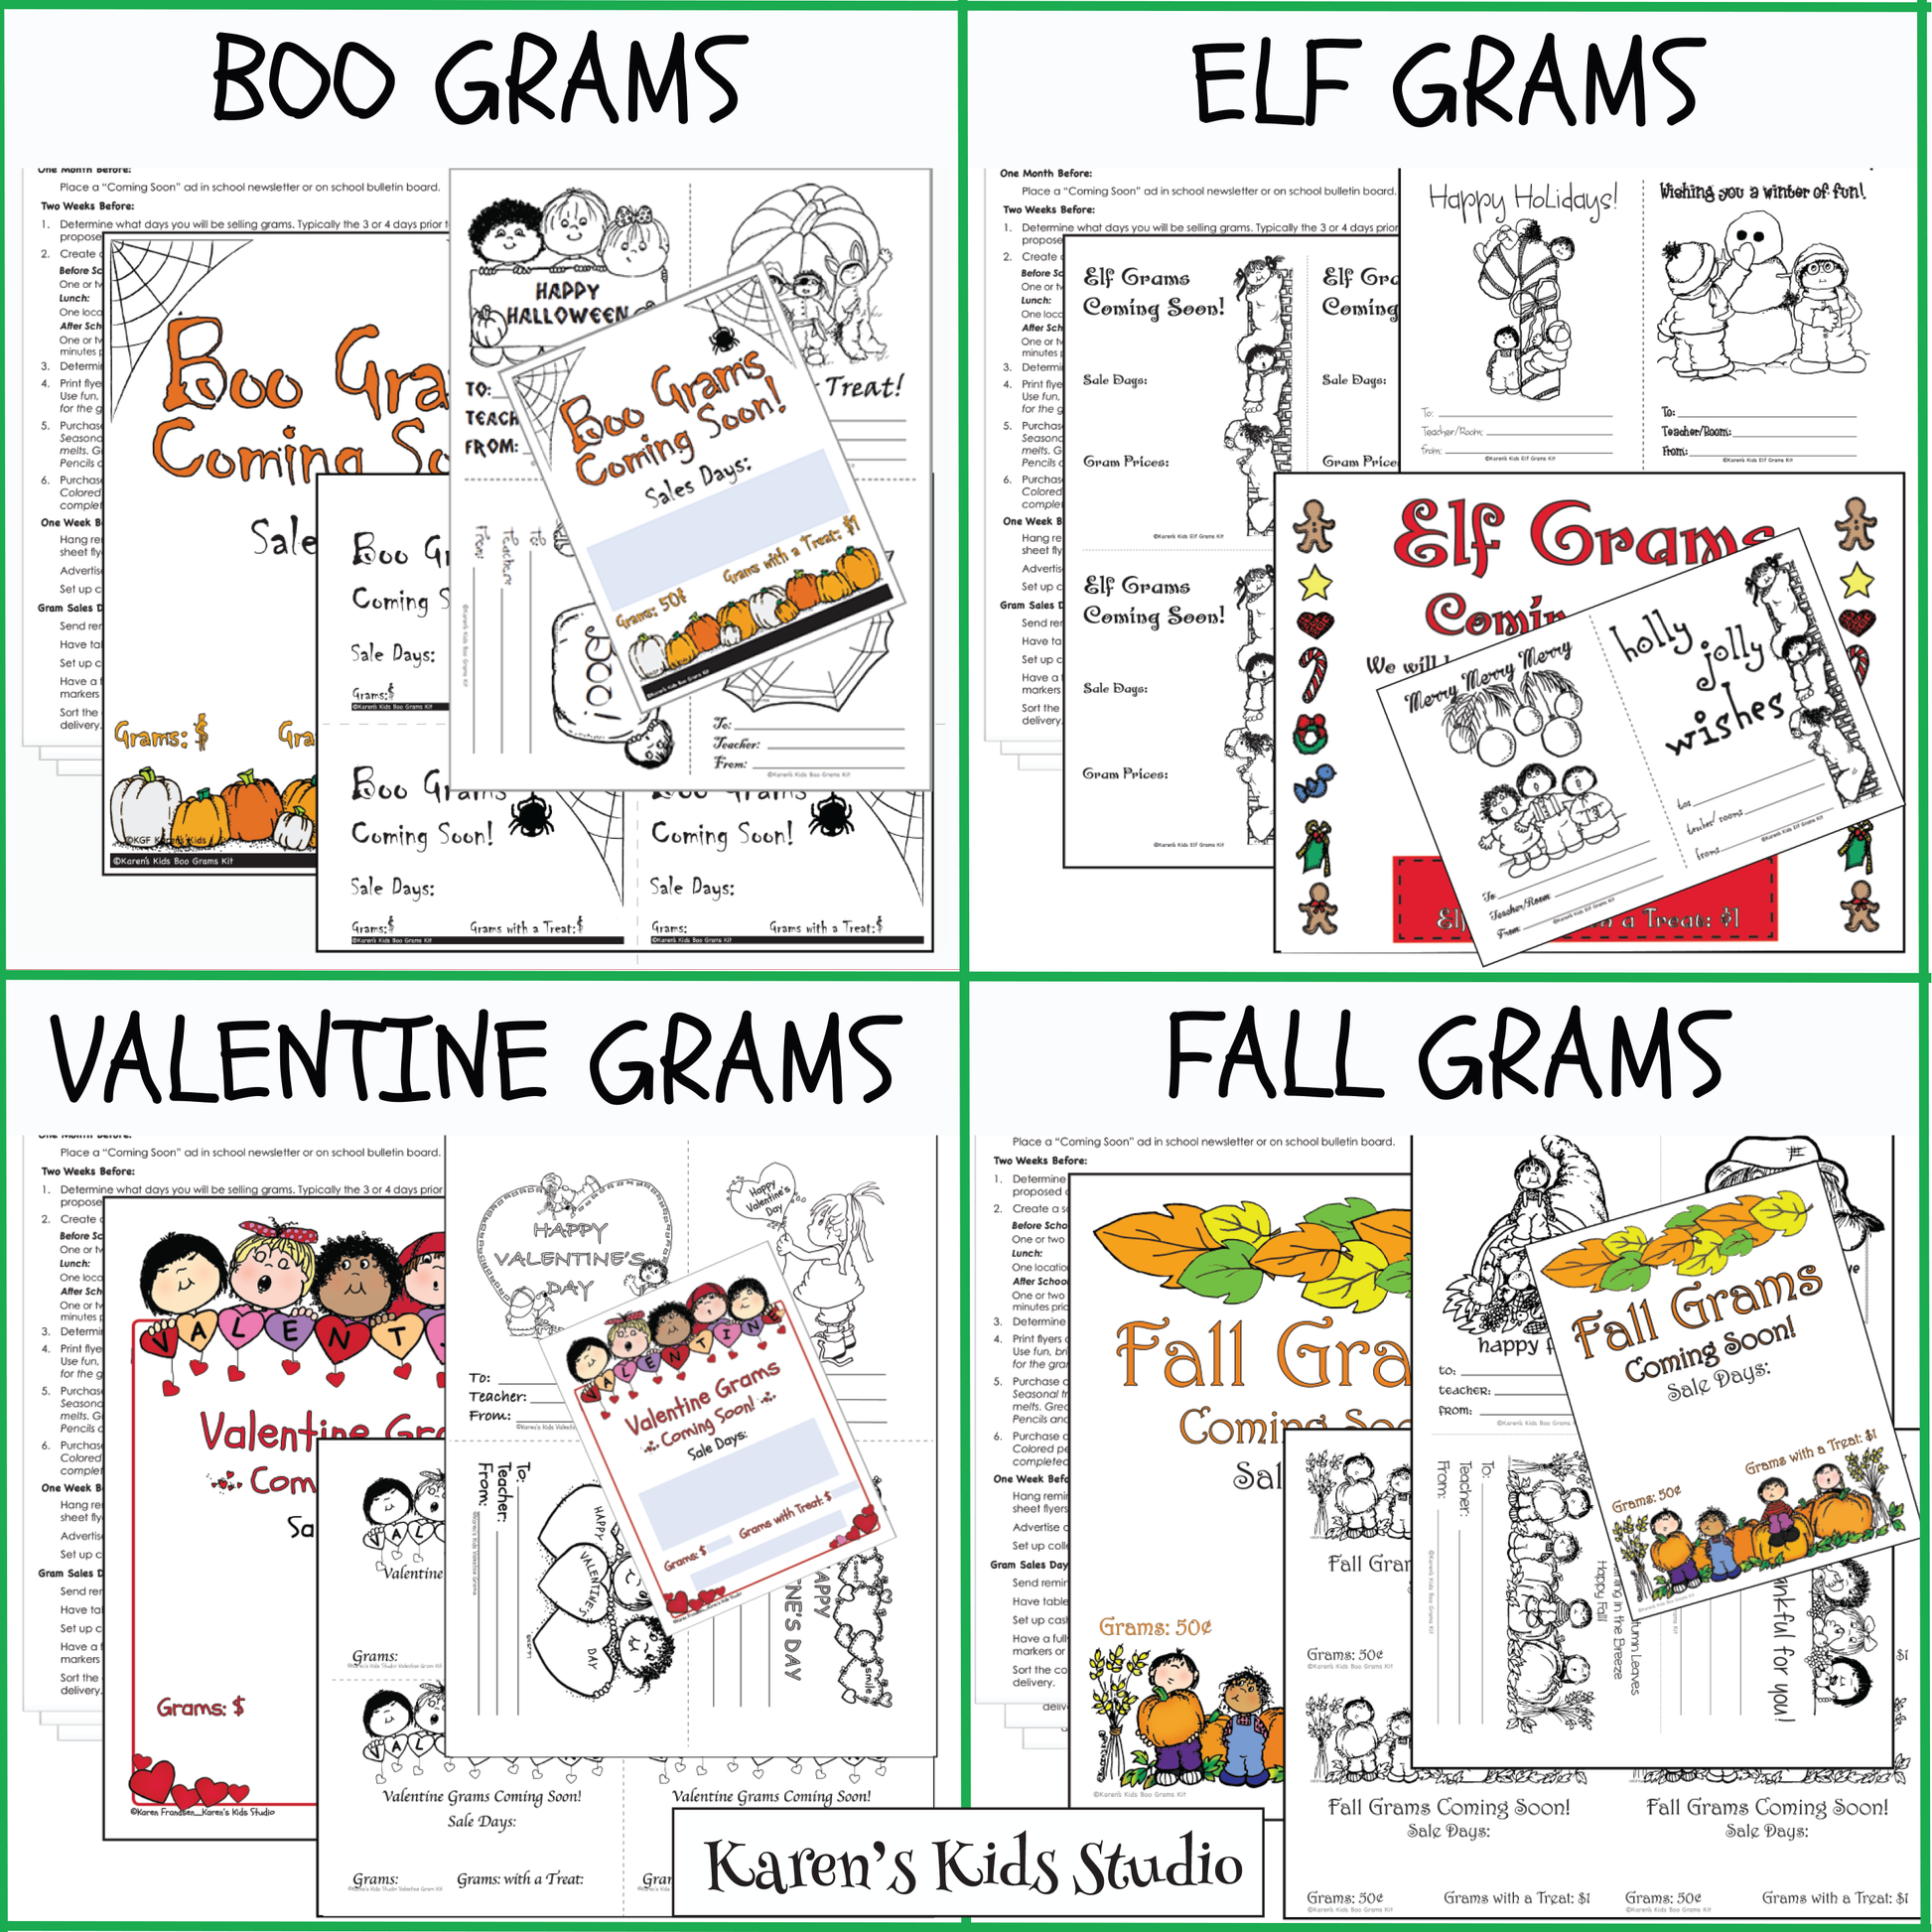 Samples of colorful holiday grams including Valentines Day, Halloween, Christmas, and Fall.